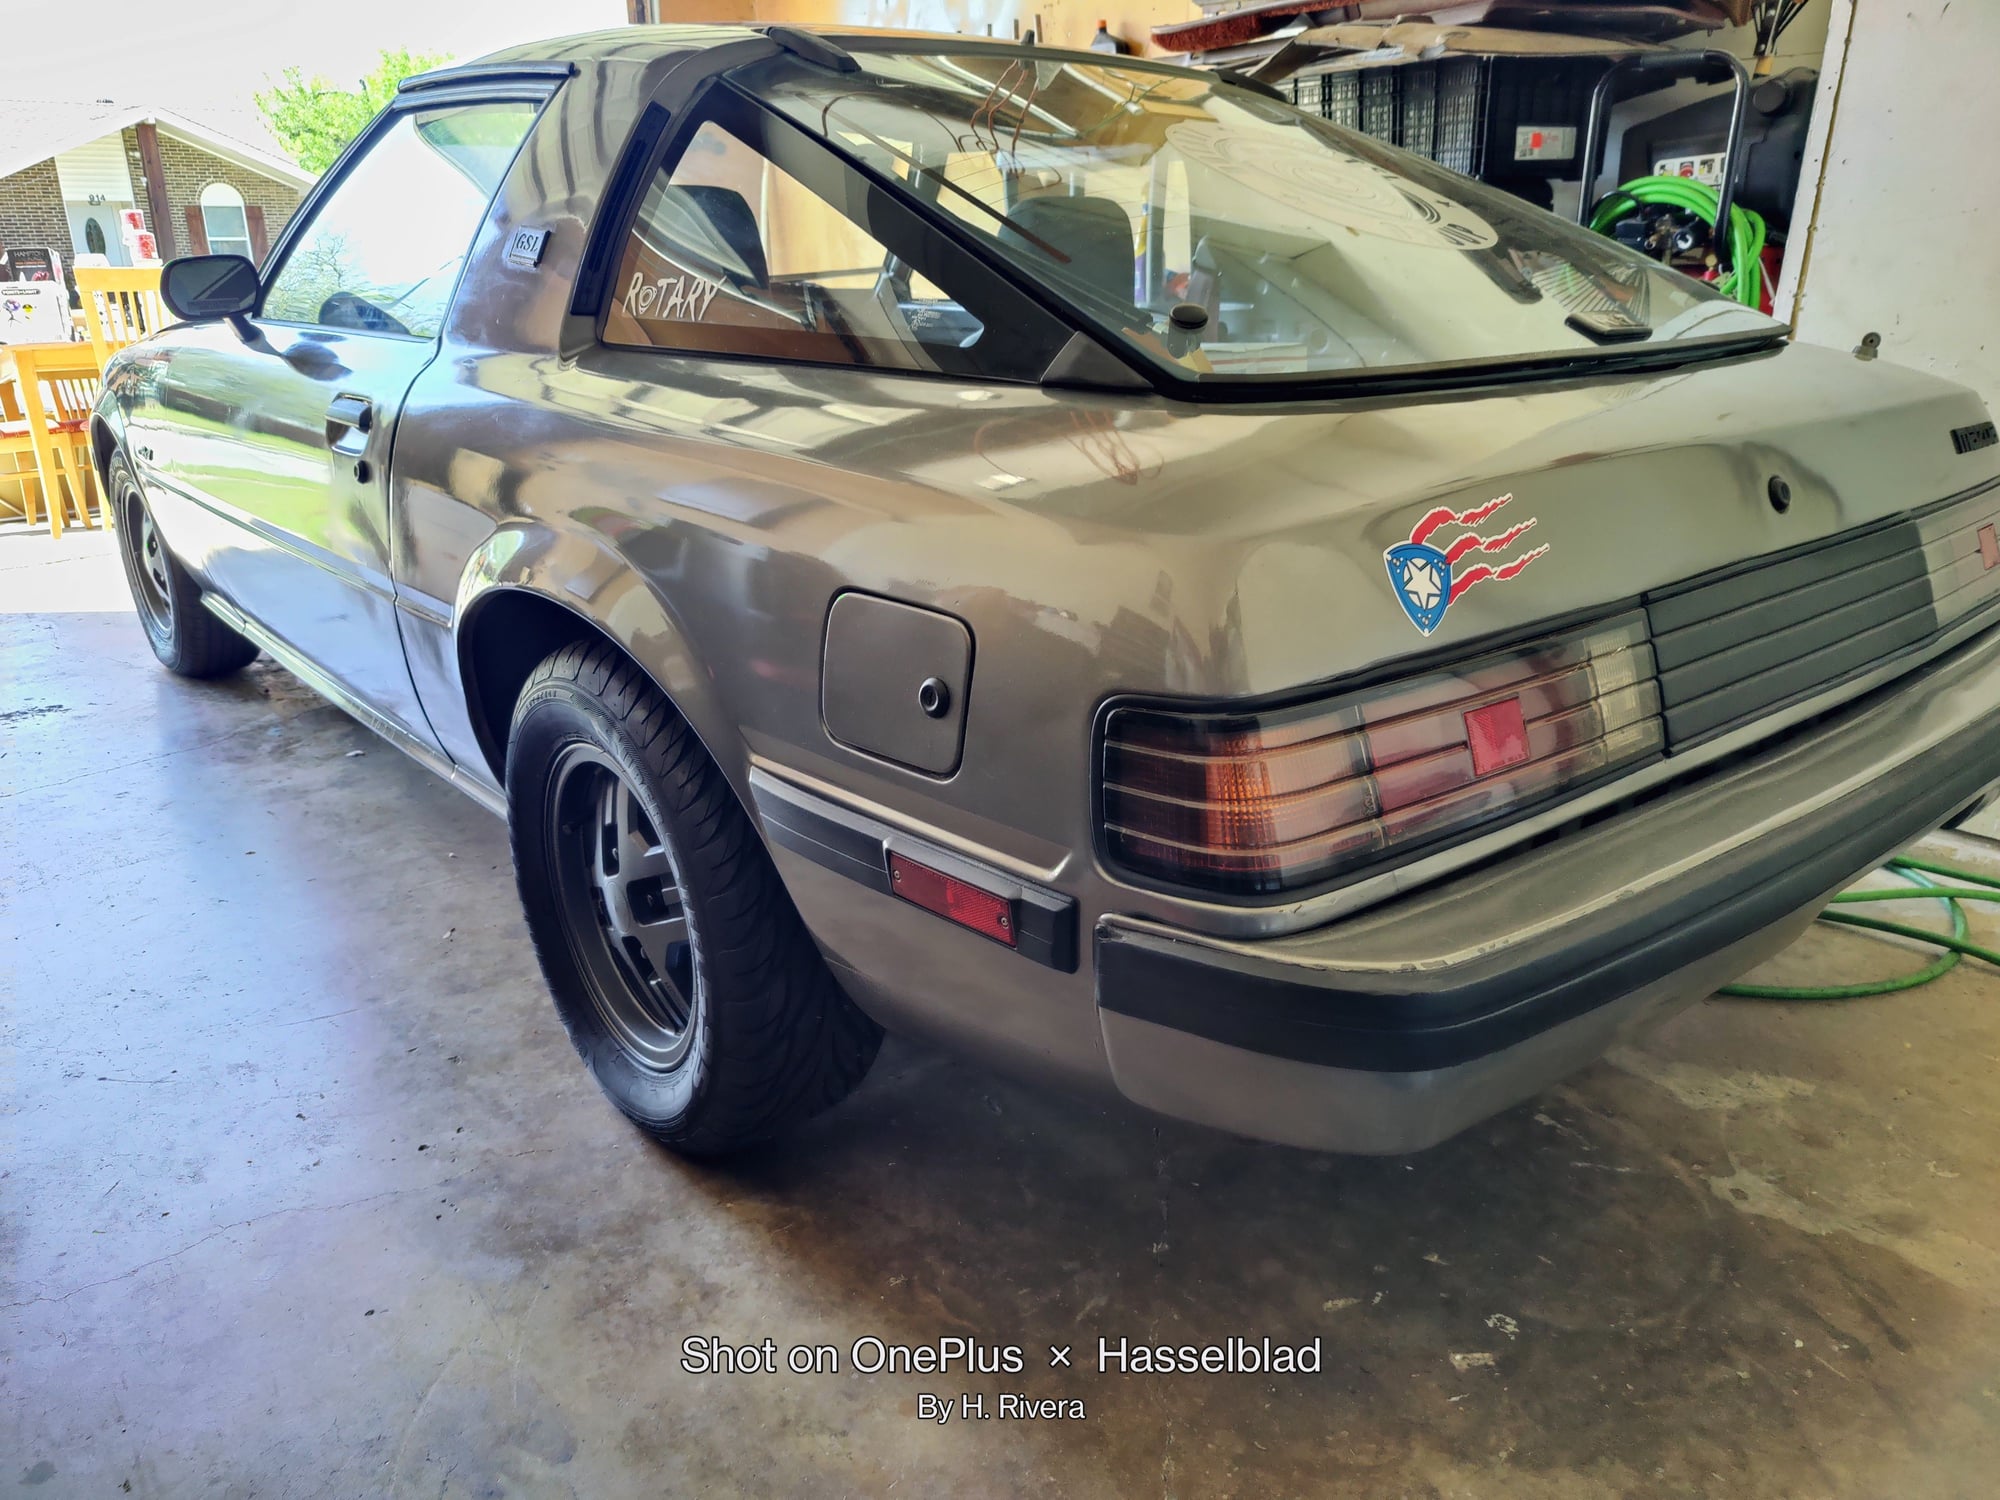 1982 Mazda RX-7 - For Sale - Used - VIN JM1FB3327C0632041 - Other - 2WD - Manual - Coupe - Gray - Allen, TX 75002, United States